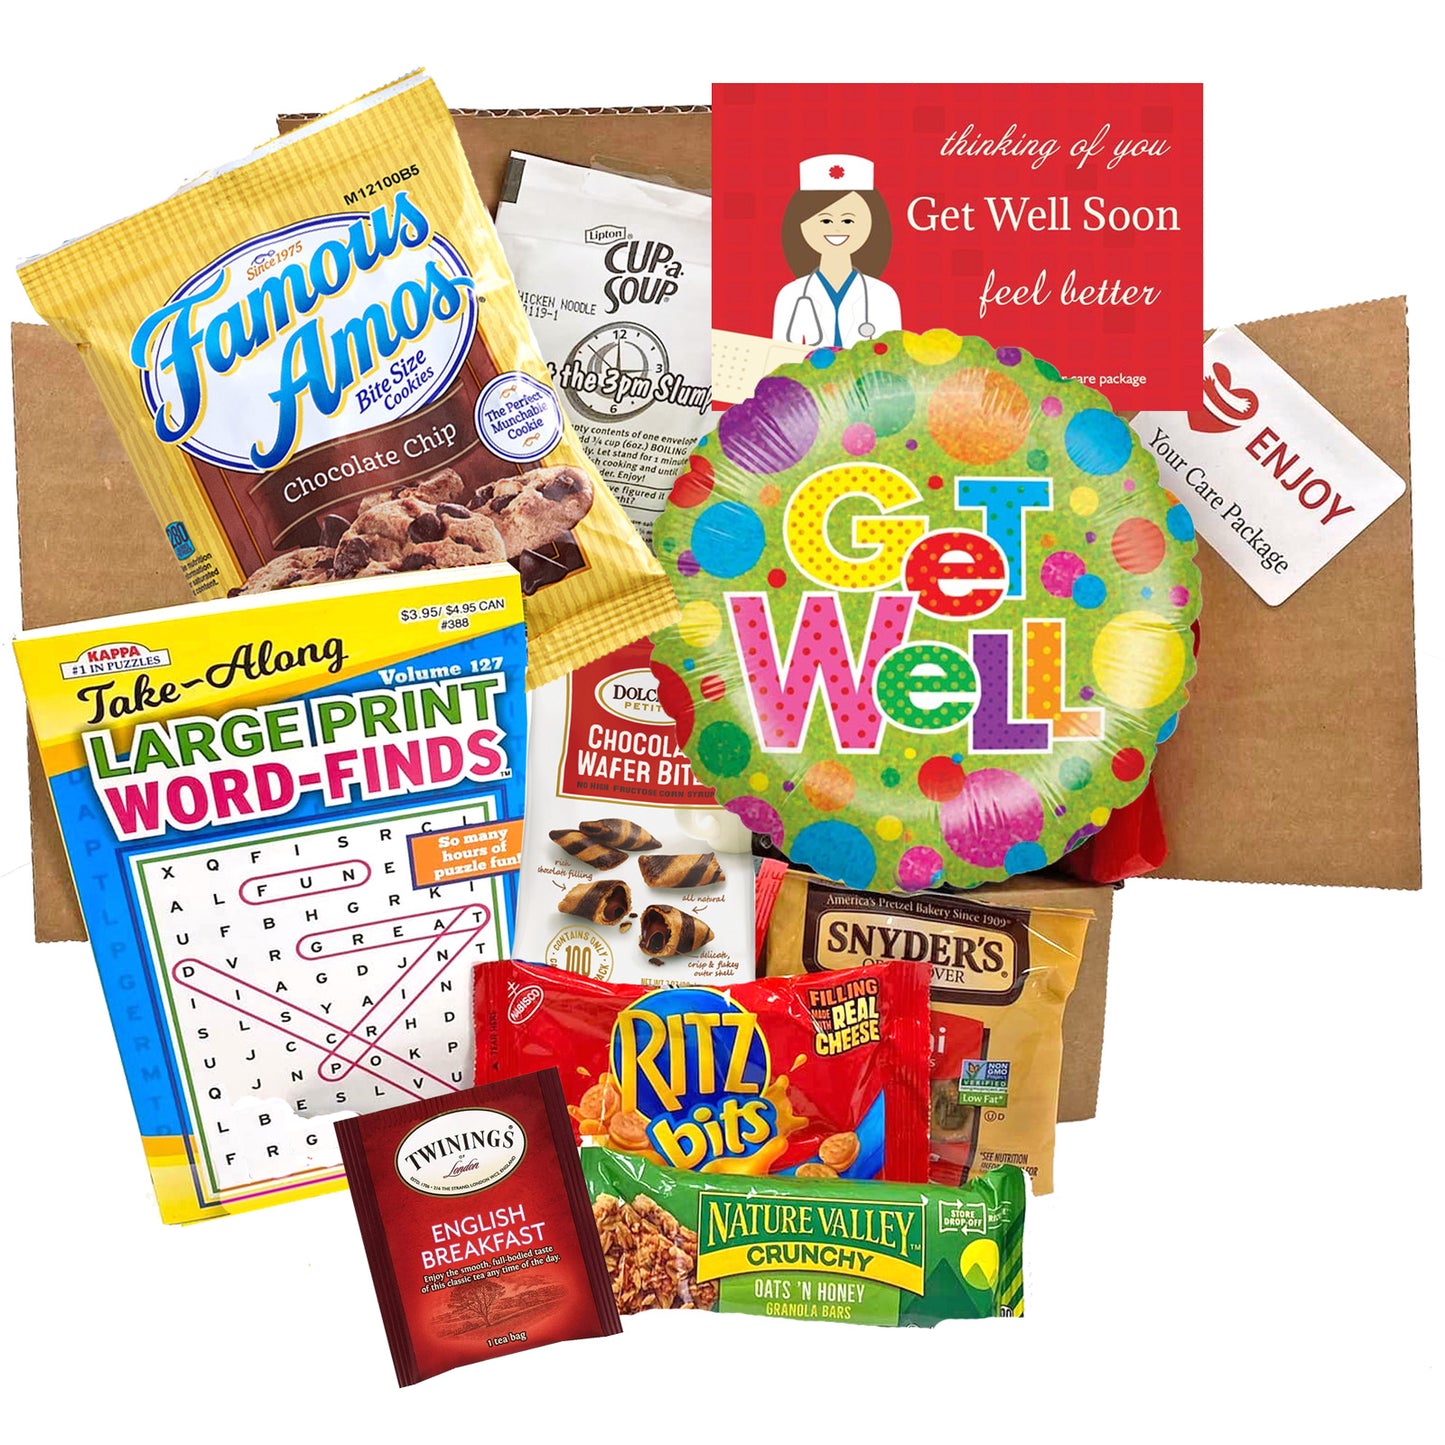 Get Well Care Package with Snacks and Word Seek Book for Men and for Women